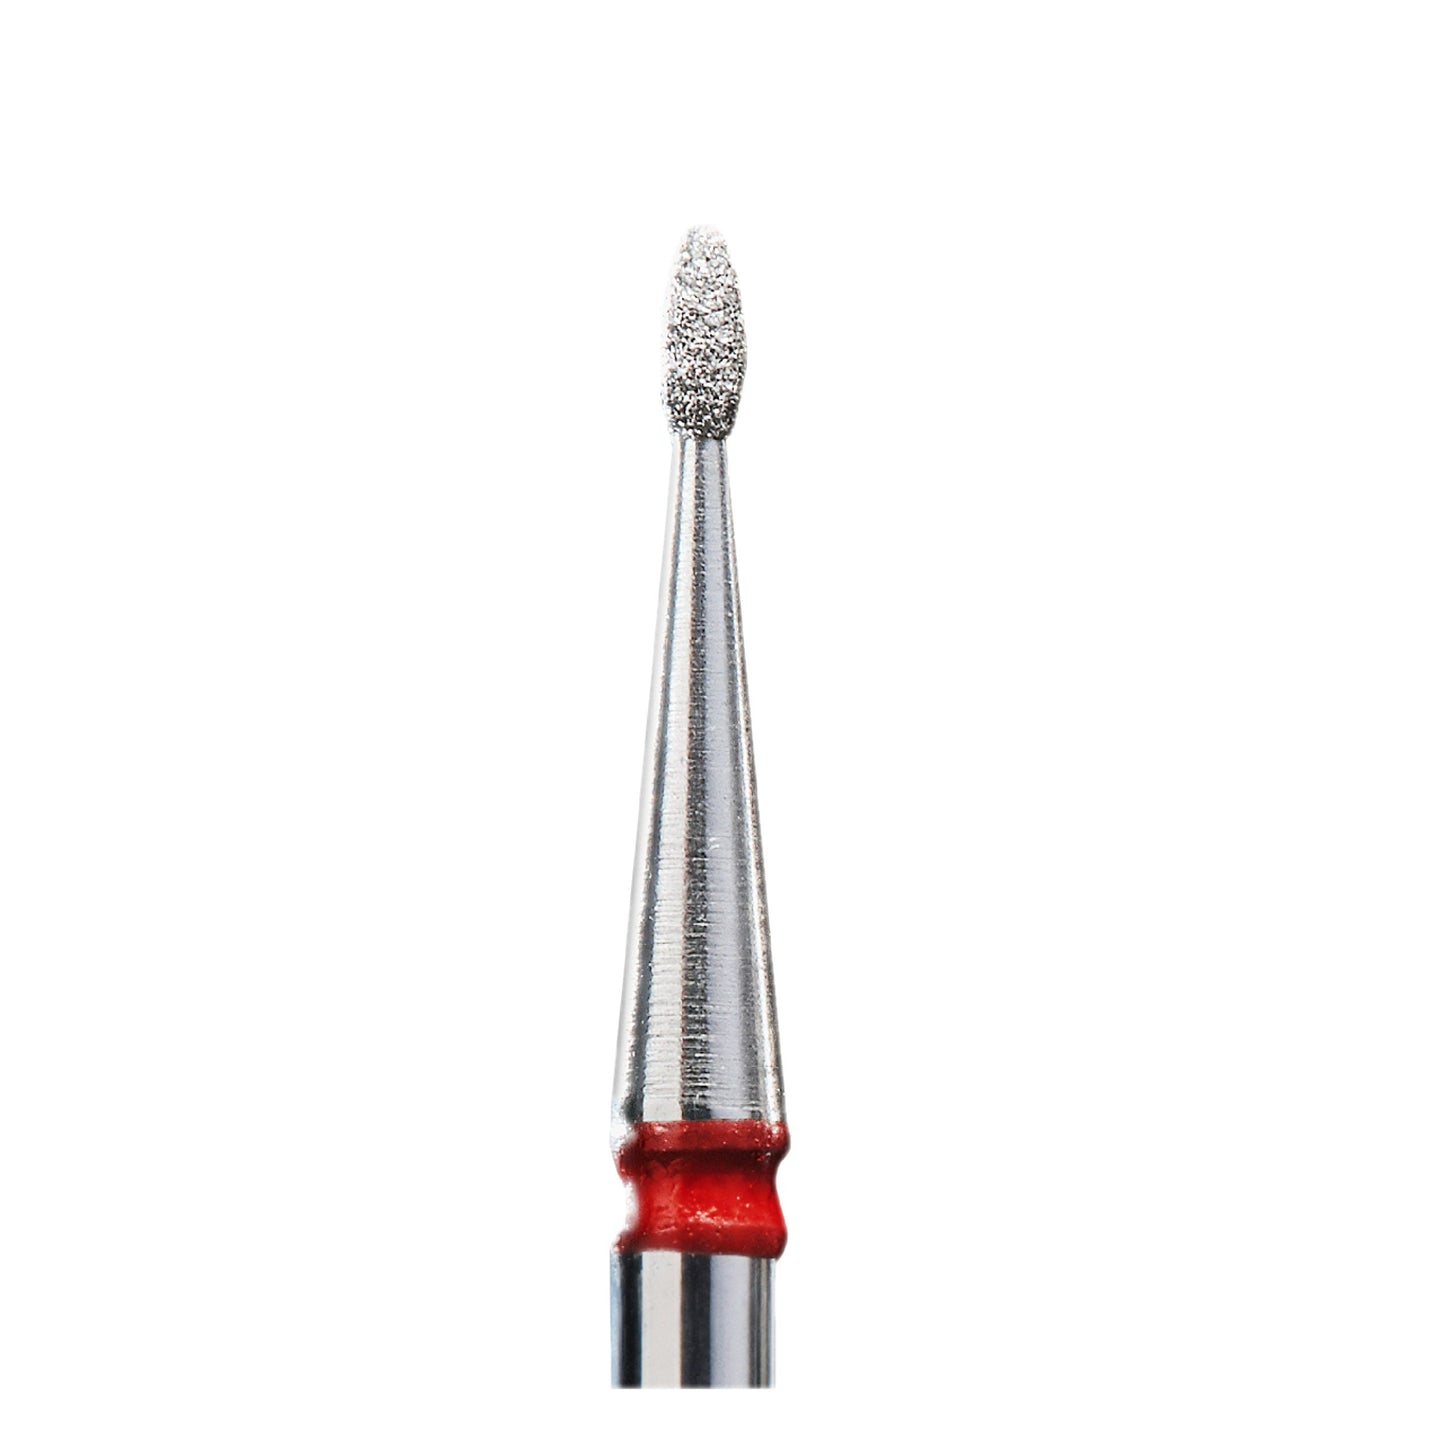 Diamond nail drill bit, rounded “bud” , red, head diameter 2.3 mm/ working part 5 mm